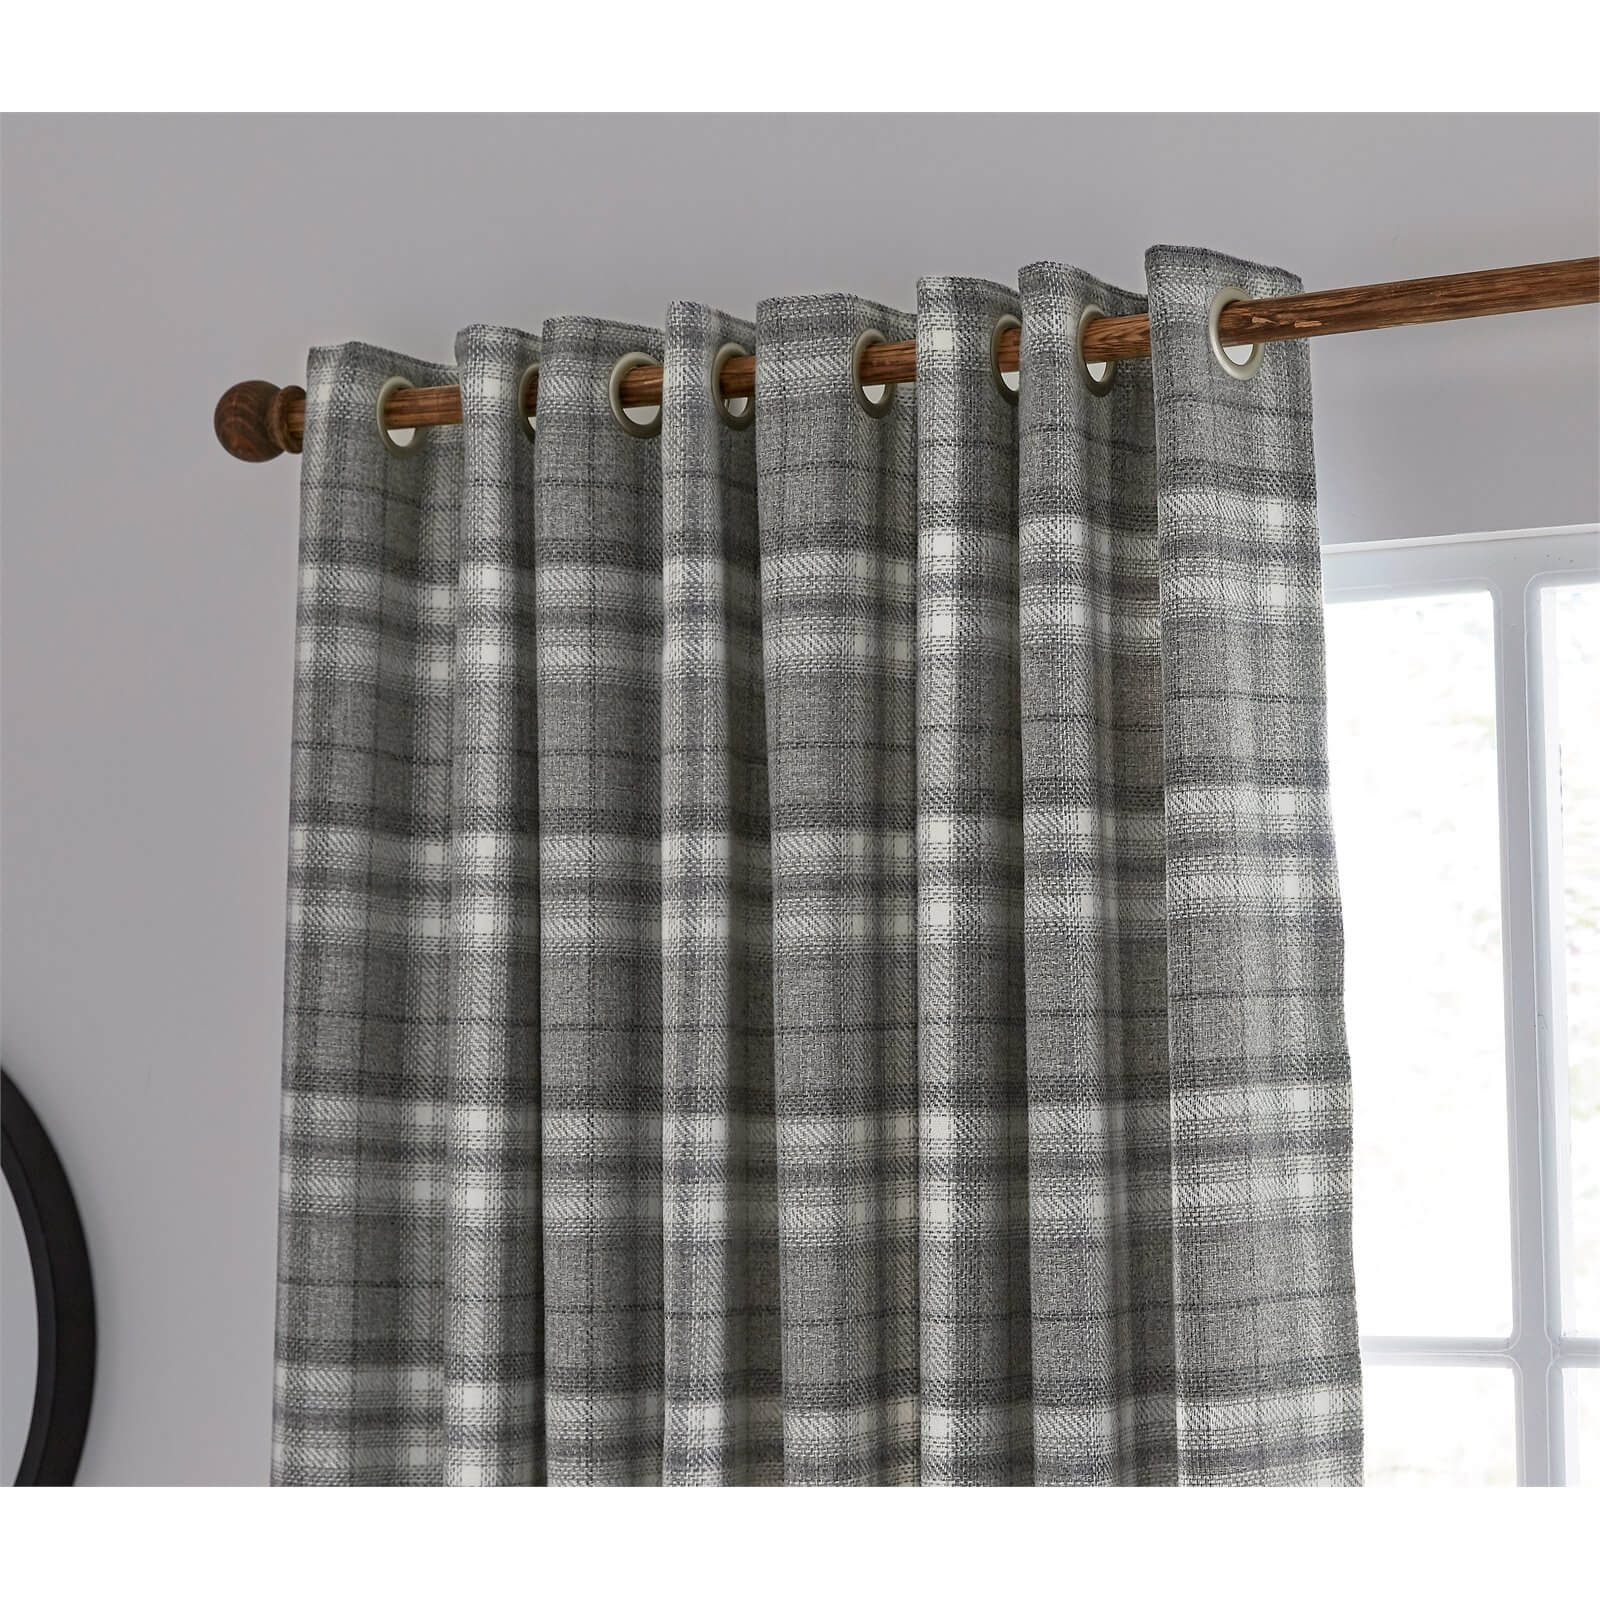 Helena Springfield Harriet Lined Curtains 66 x 72 - Charcoal